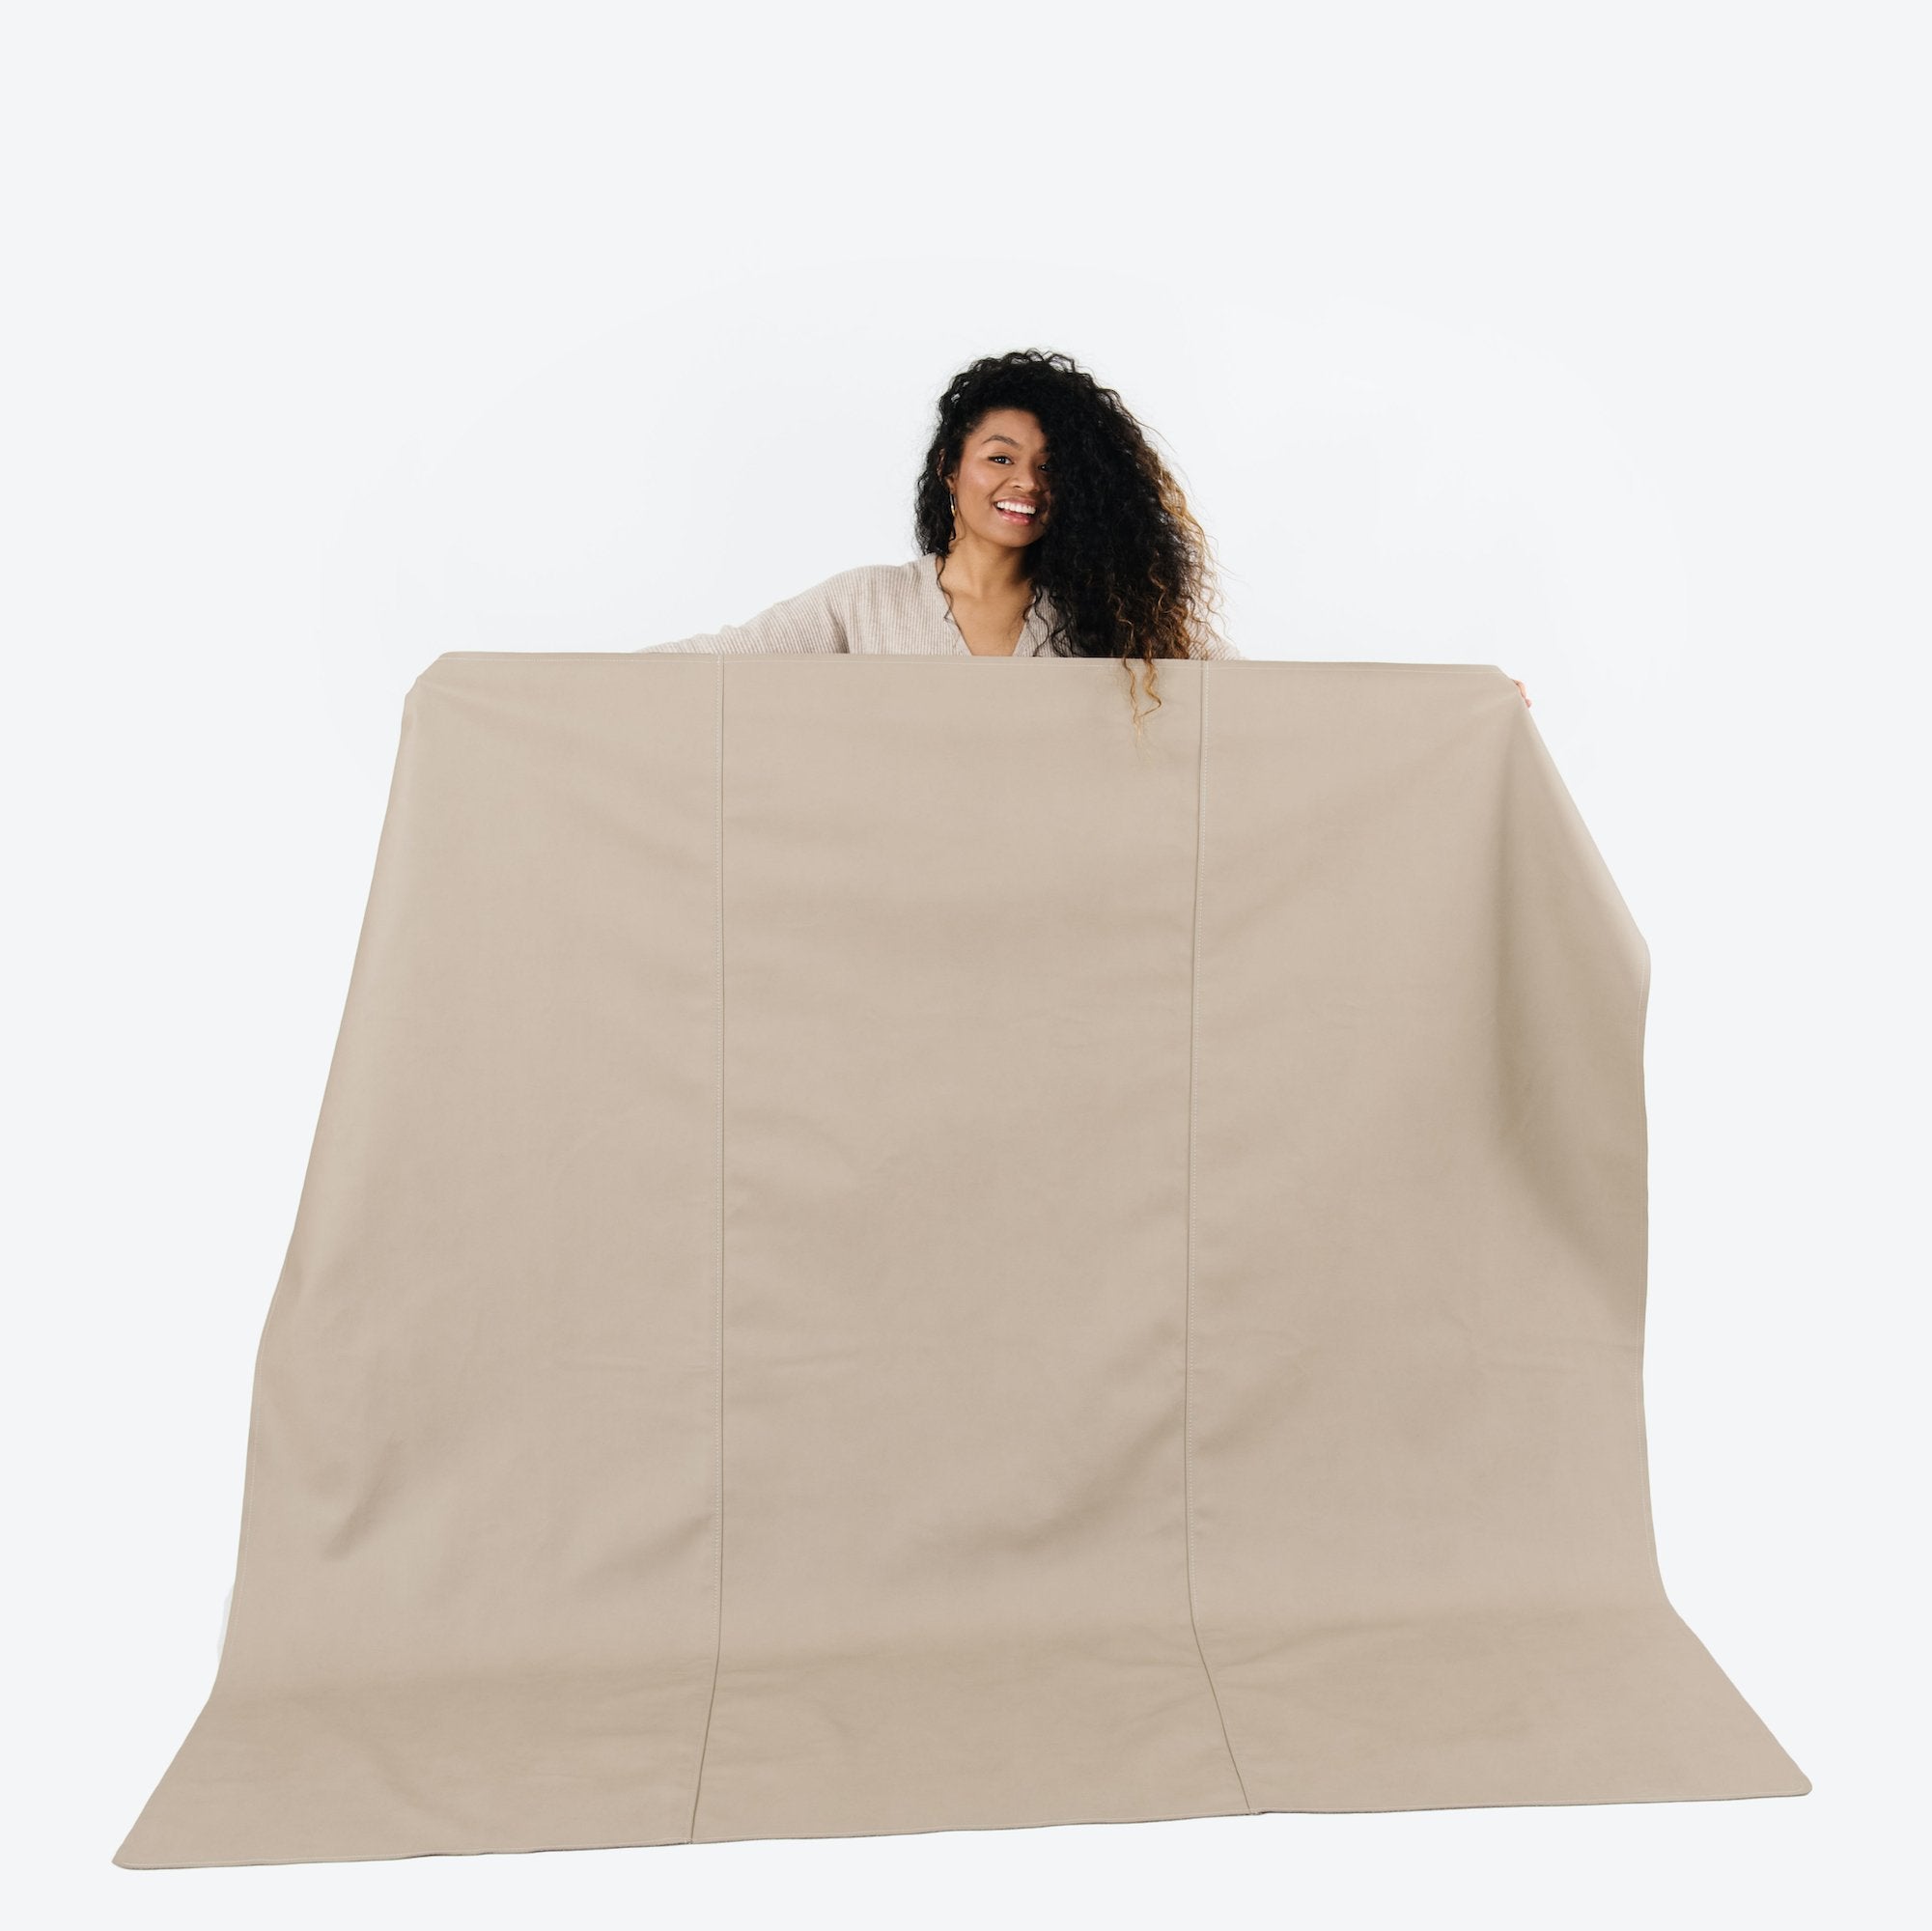 Ember (on sale) / Square@Woman holding a Ember Square Maxi Mat